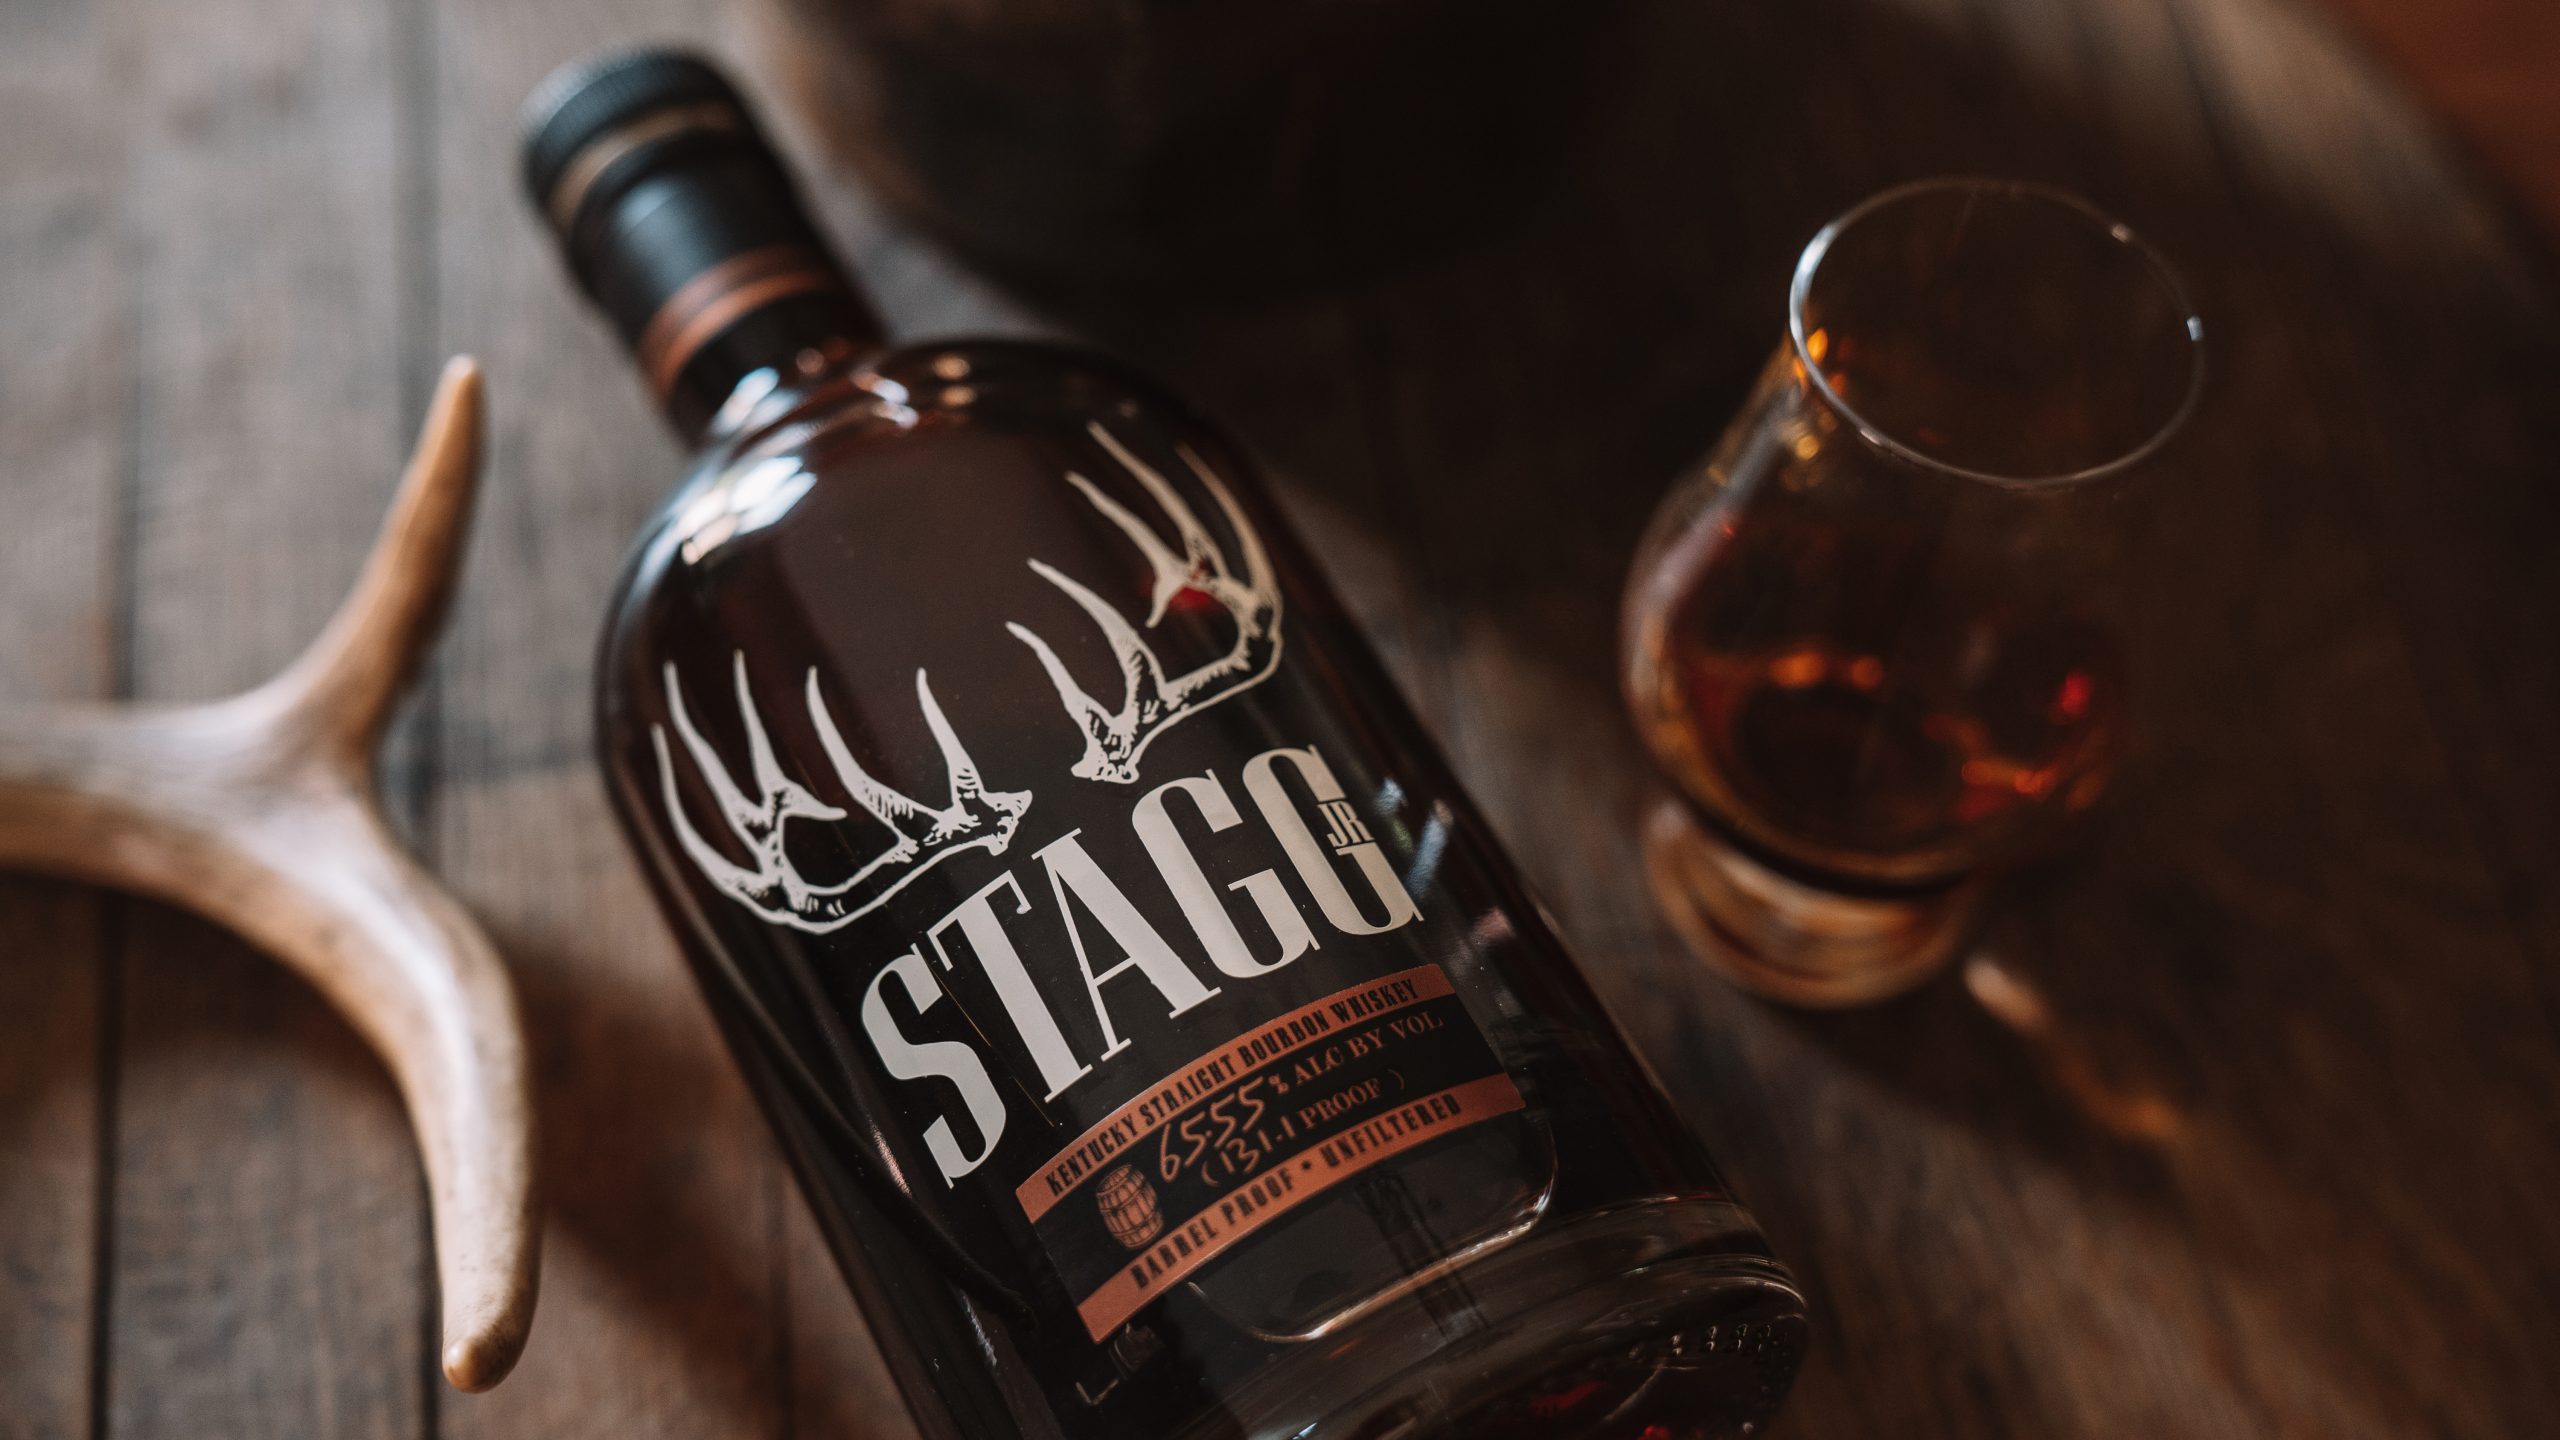 Stagg Jr 15th barch 131.1 proof Buffalo Trace